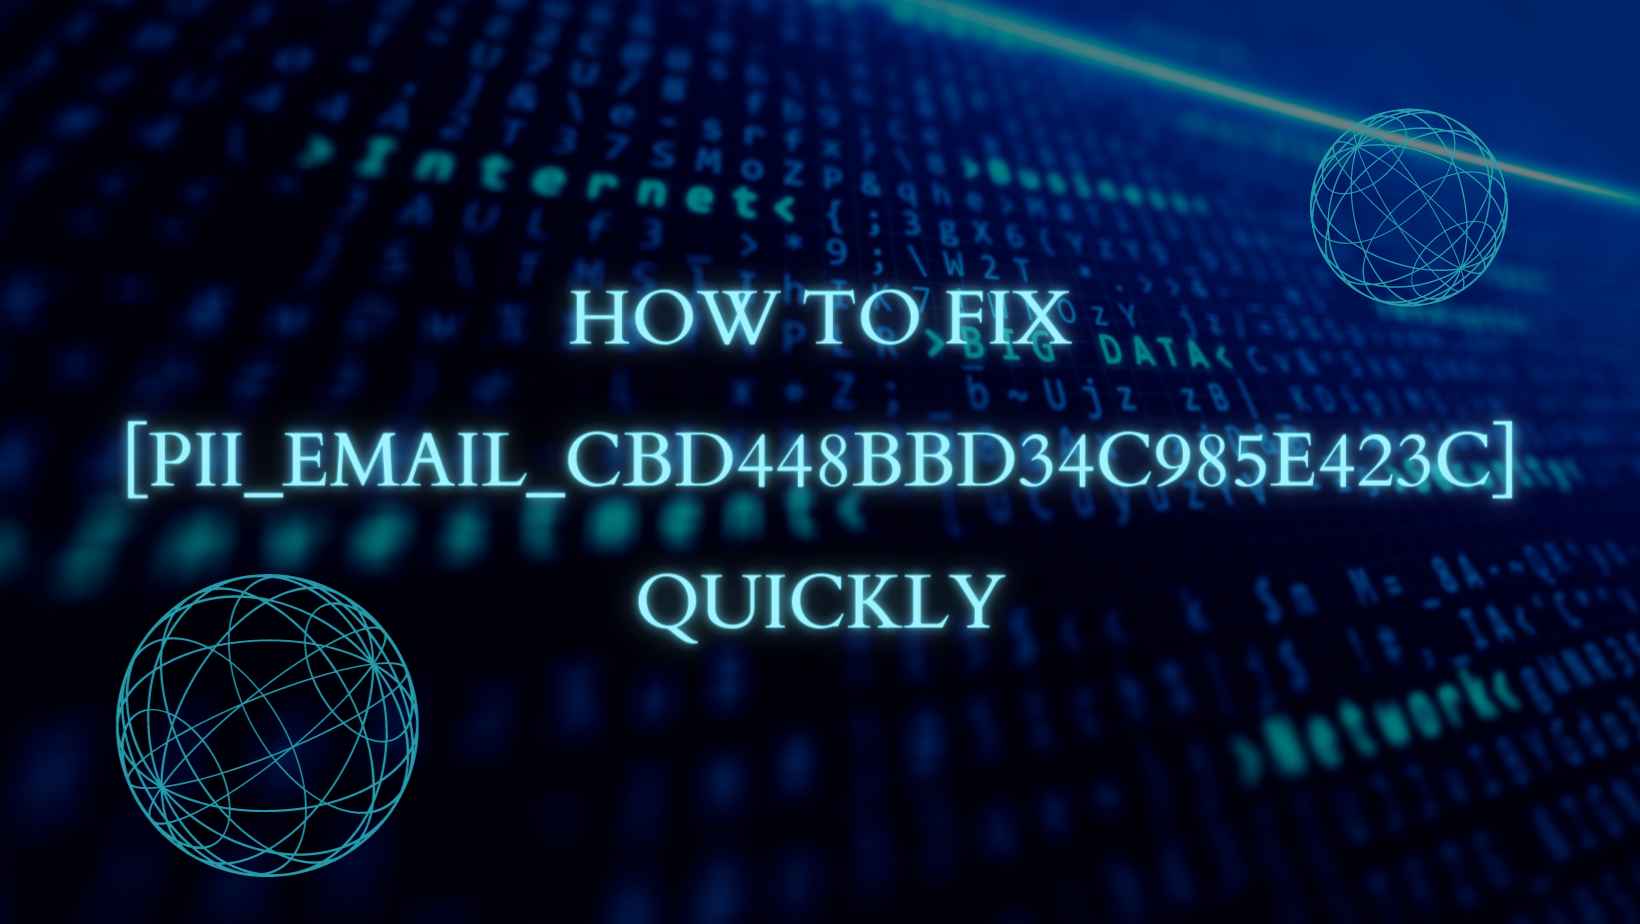 How To Fix The Error Code [pii_email_cbd448bbd34c985e423c] Quickly